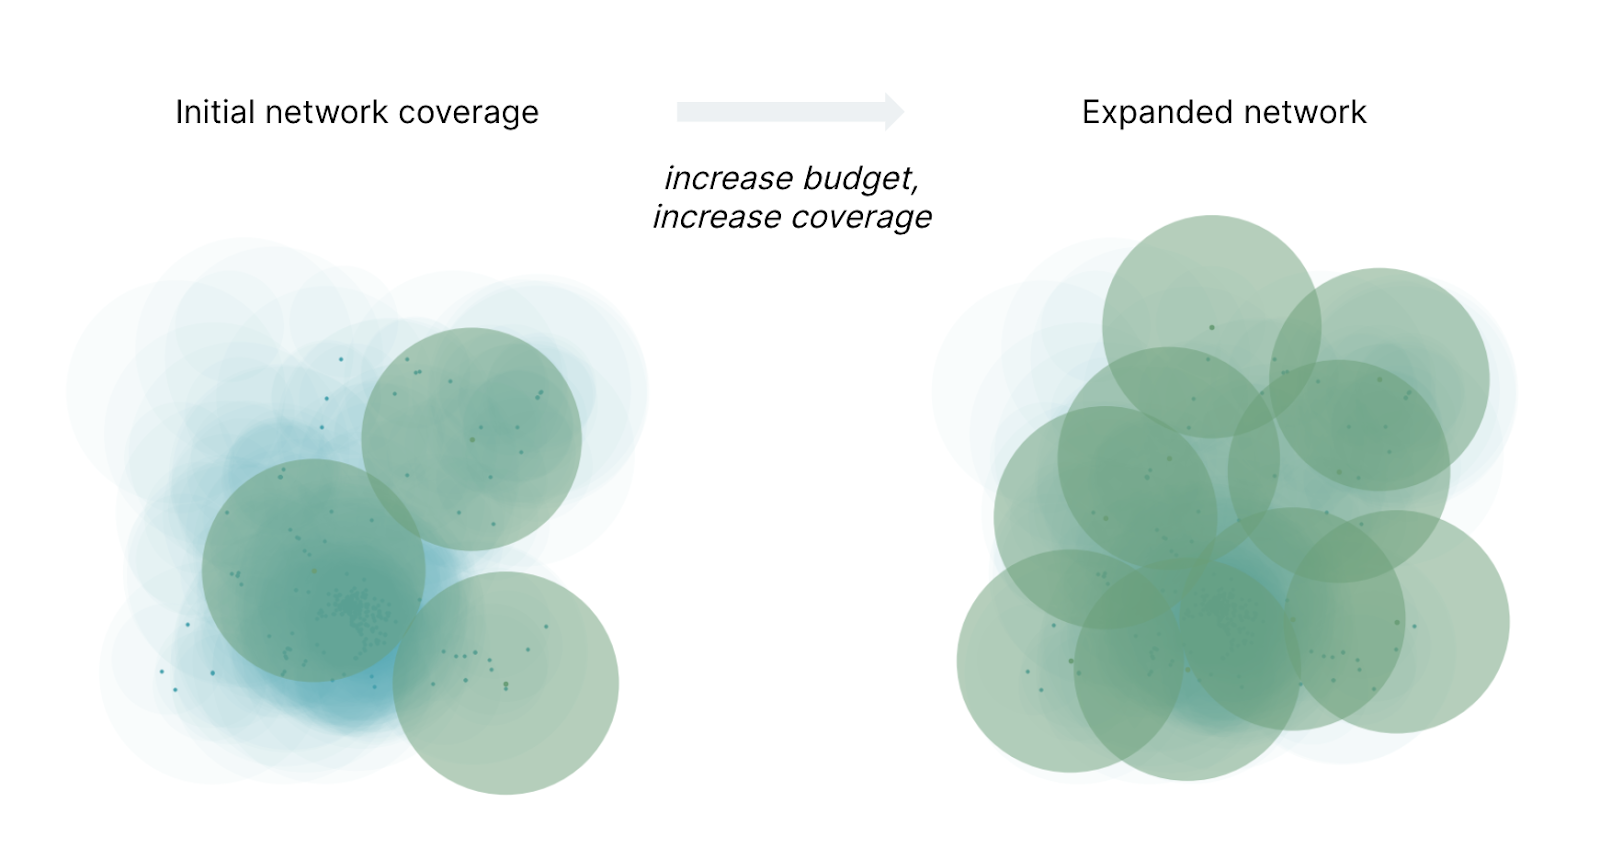 Optimal network designs based on a strategy as parameters change. Initial network coverage is represented as three circles partially overlapping or just touching. With increaded budget, increased coverage, the expanded network is represented with nine circles overlapping to show the larger area of the network.